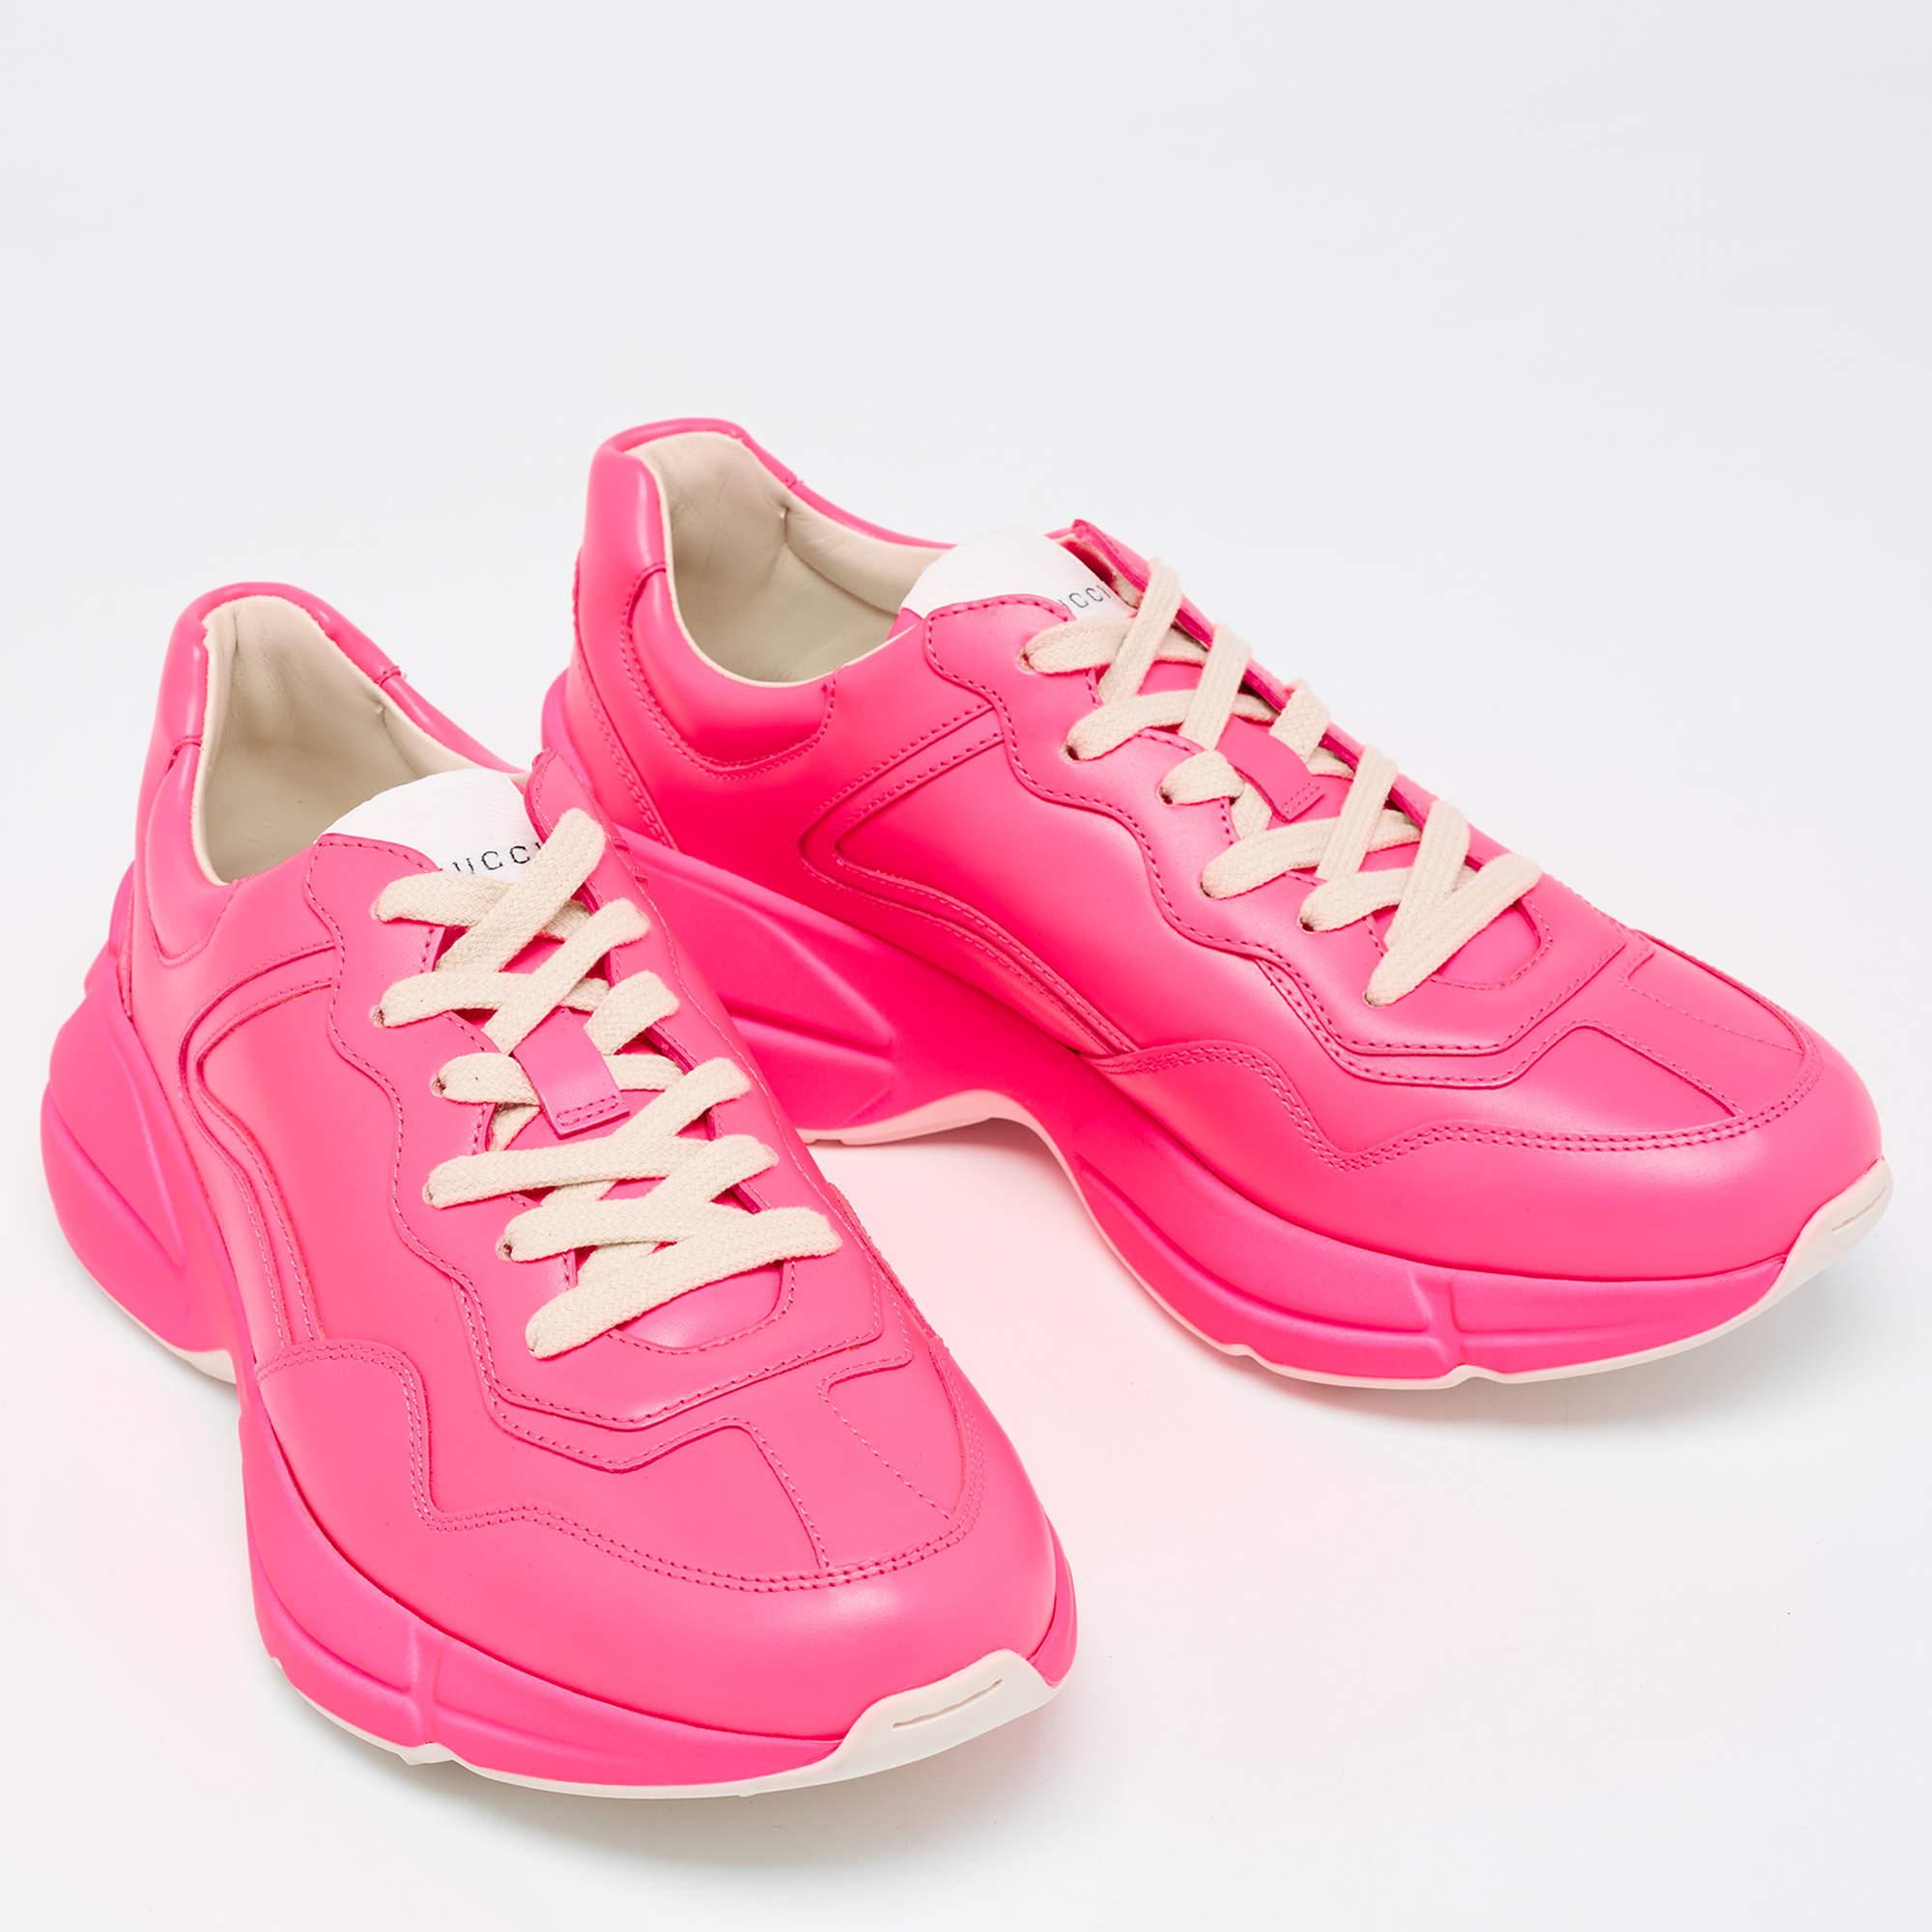 Gucci Neon Pink Leather Rhyton Sneakers Size 39 1